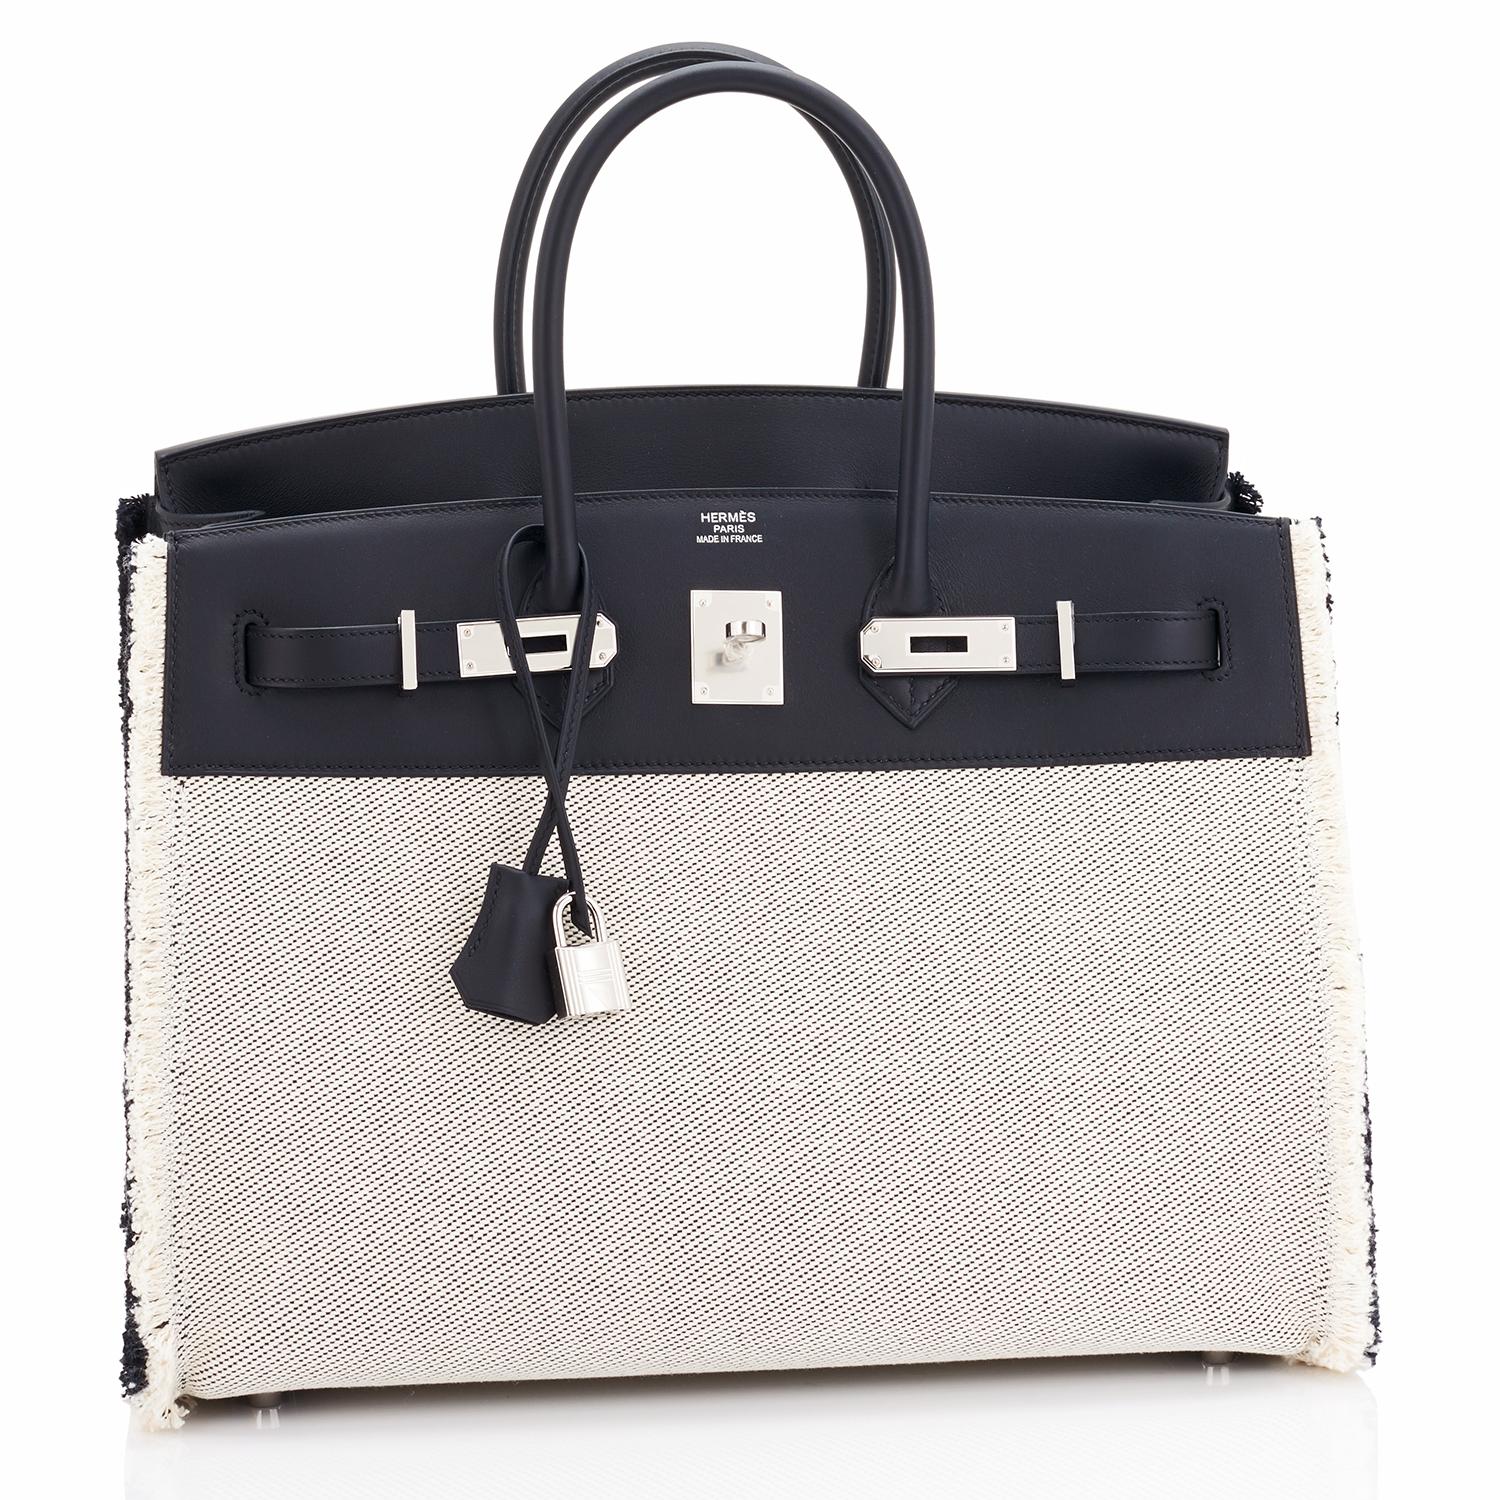 Chicjoy is pleased to offer this Hermes Birkin 35cm Black Fray Fray Toile Tote Bag
Very rare limited edition piece offered to VIP's!
Just purchased from Hermes store. Bag bears new interior 2021 Z Stamp.
Brand New in Box. Store fresh. Pristine